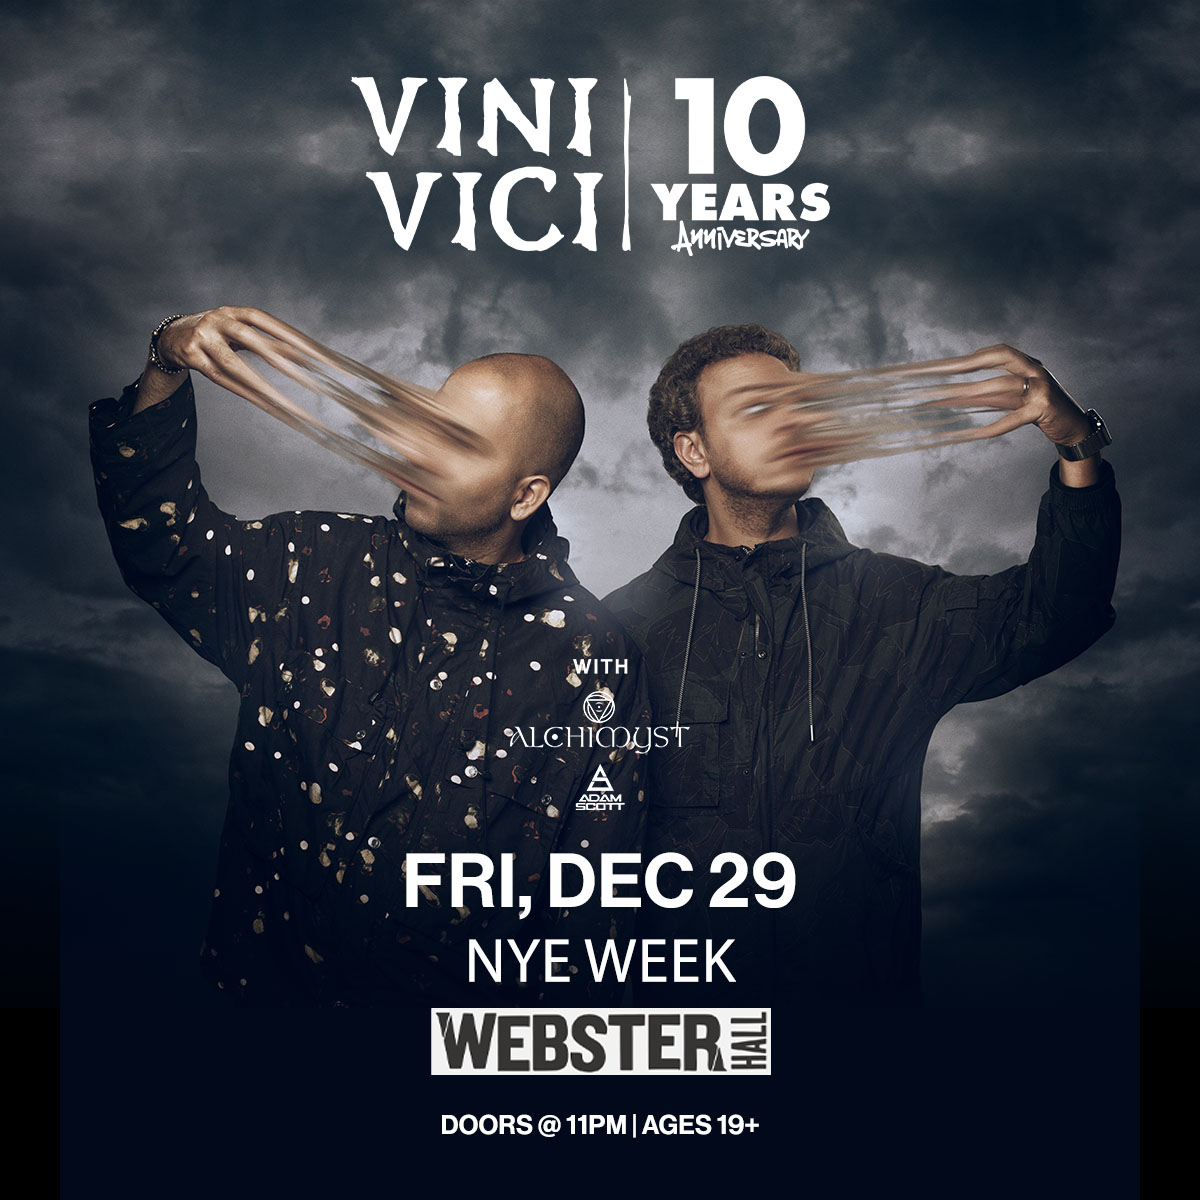 Great News To Our USA Tribe 🇺🇸♥️🇺🇸 We Are Coming To Celebrate New Years Eve With you! See You All There #ViniVici @bowerypresents #GoodViebsOnly #JoinTheTribe